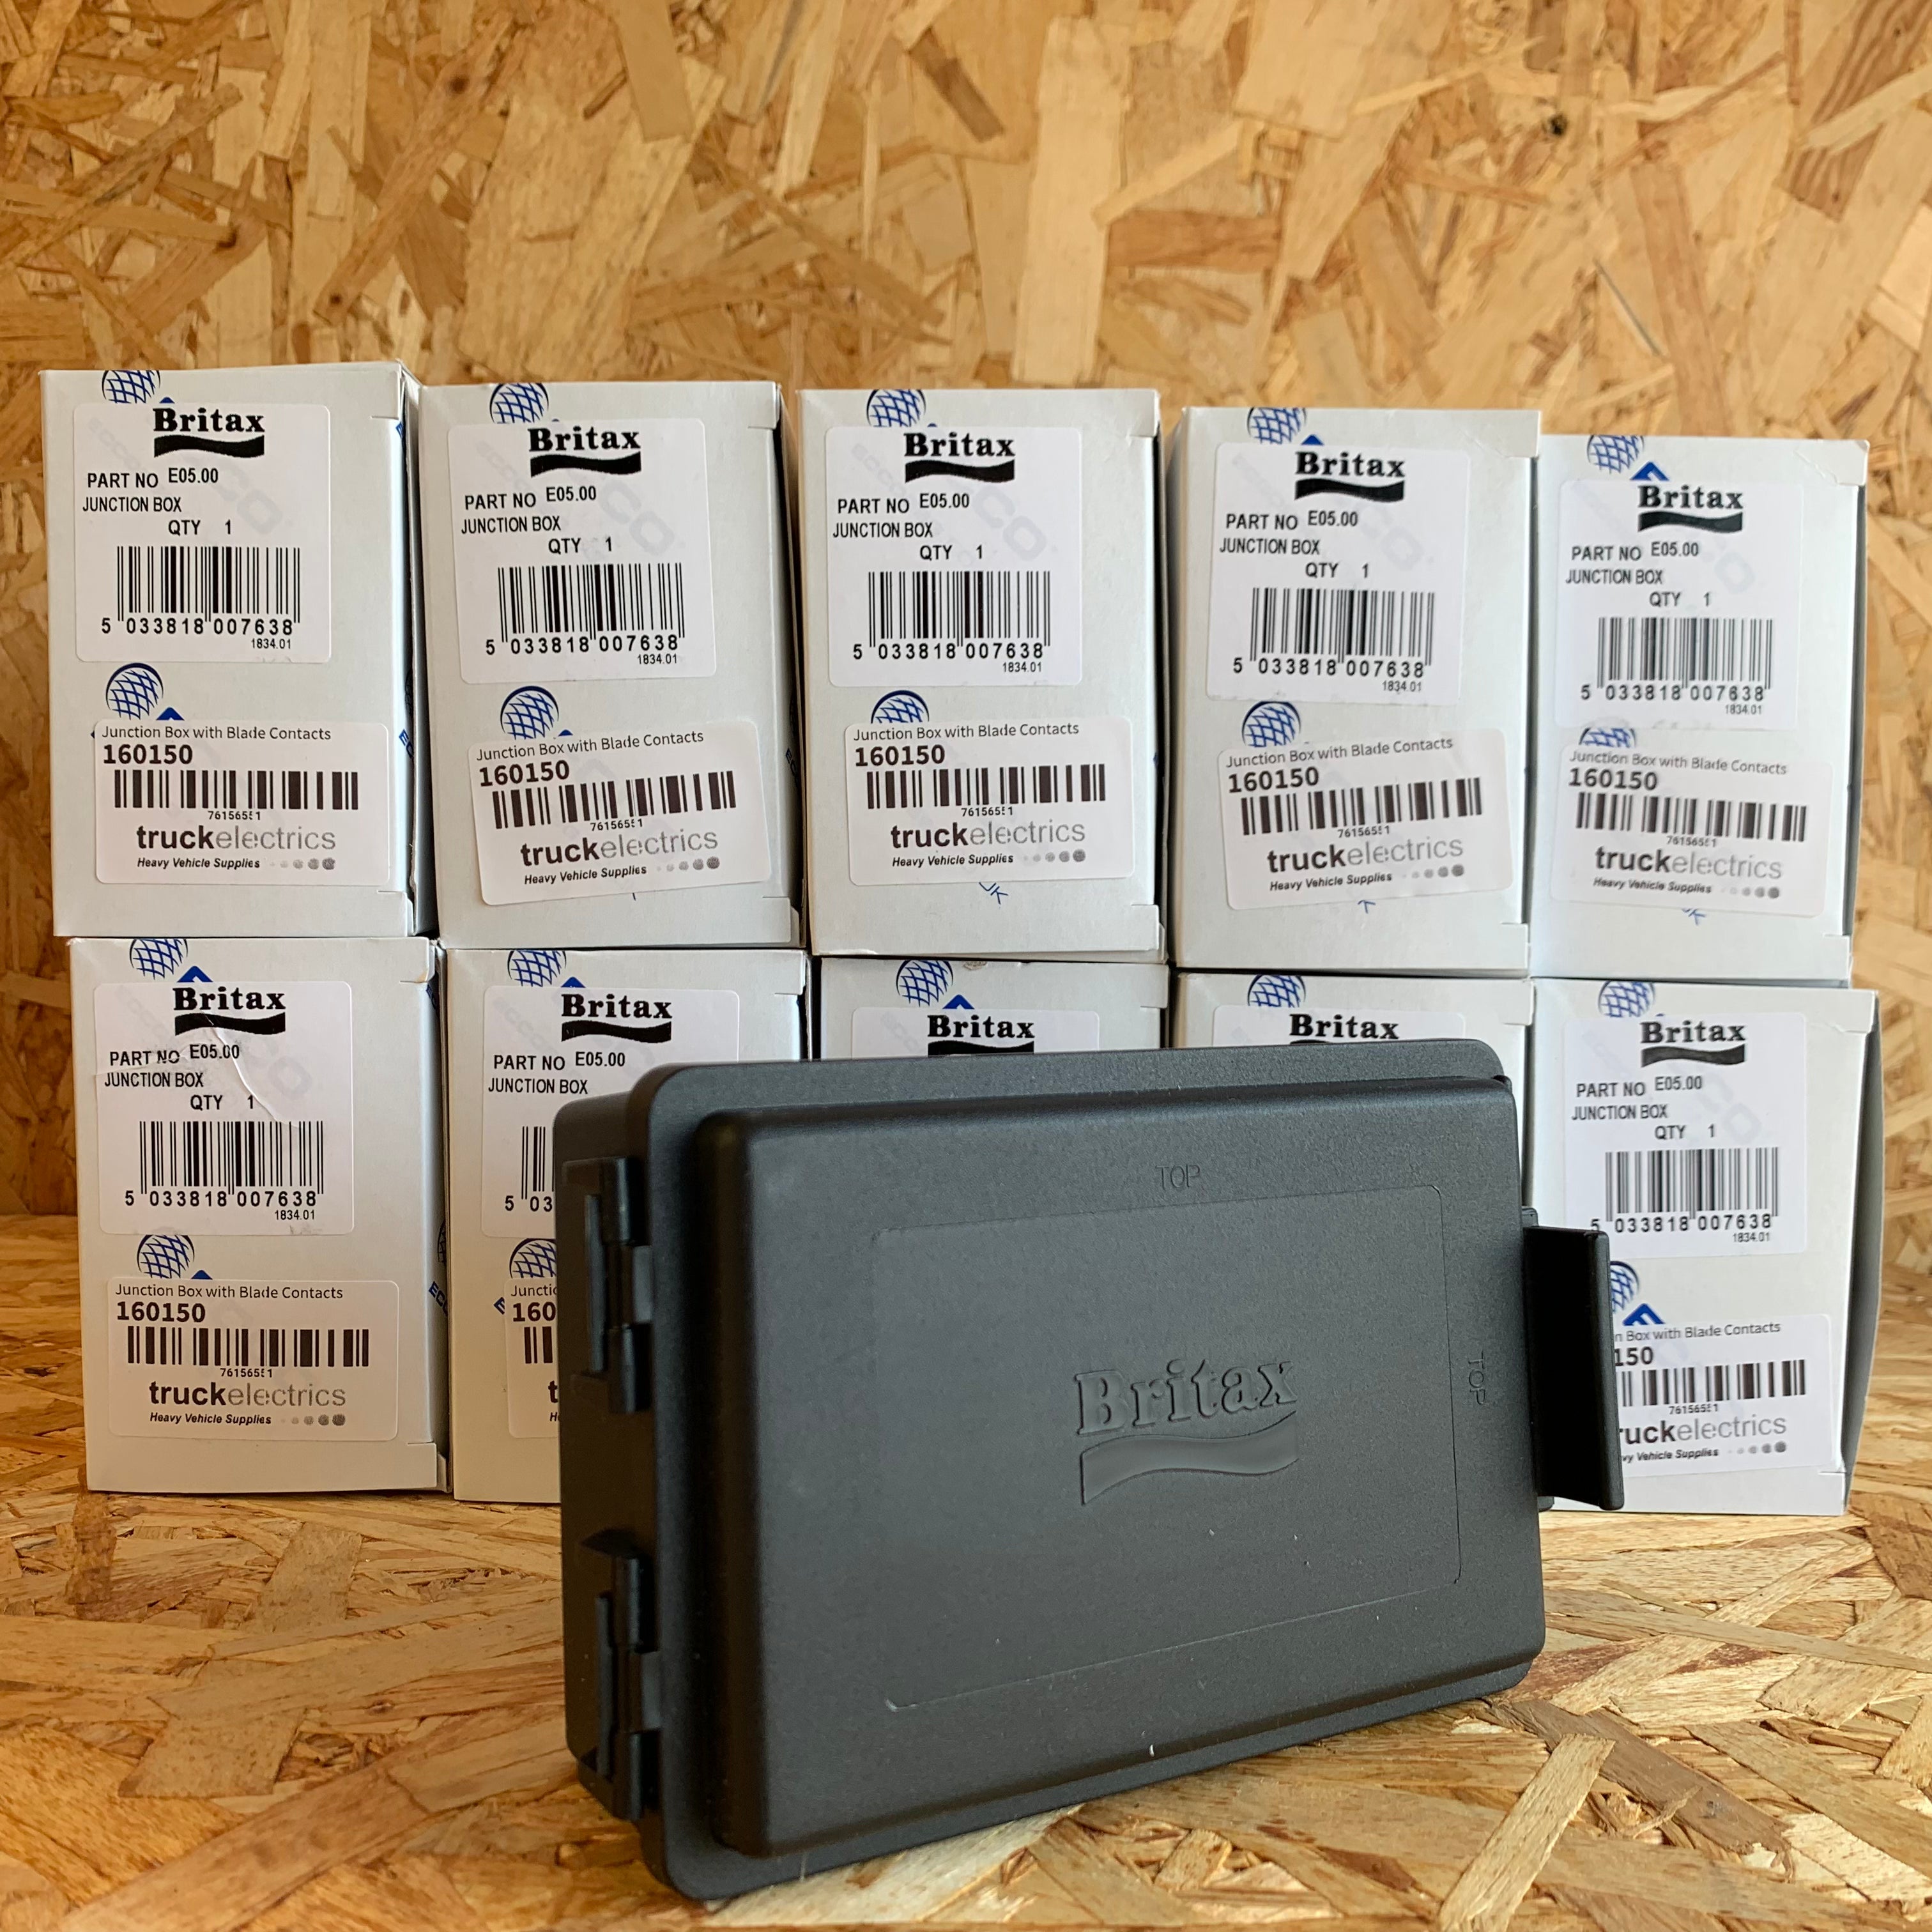 Pack of 10 Britax Junction Boxes *Special Offer* - Junction Boxes - spo-cs-disabled - spo-default - spo-disabled - spo